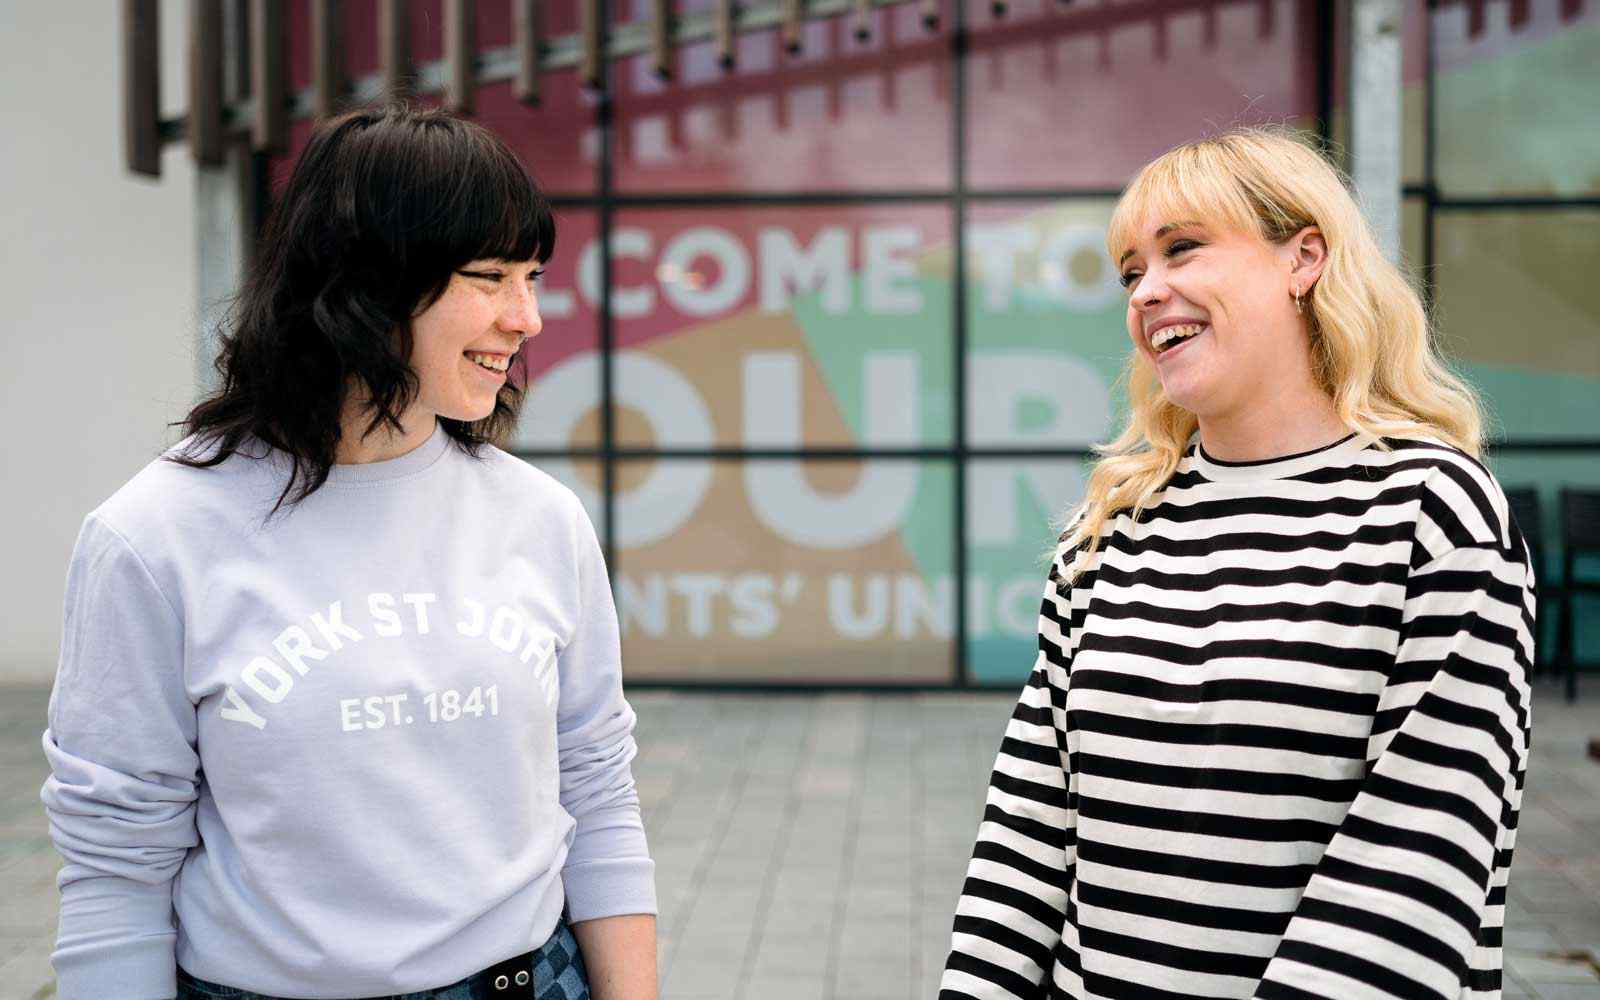 Two members of Students' Union team smiling in conversation outside SU building 